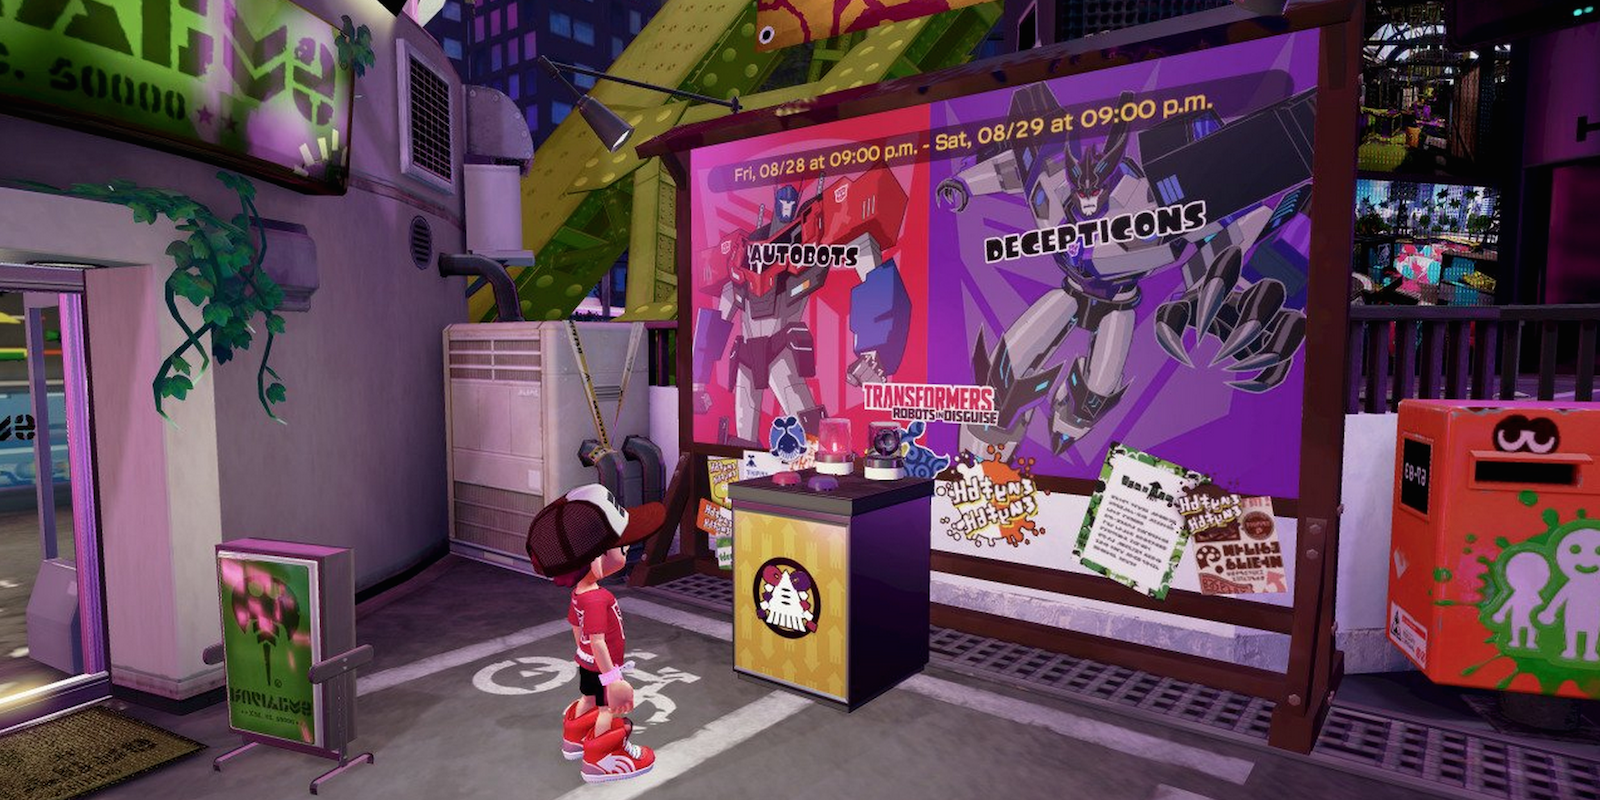 Nintendo Teams Up With Hasbro for Transformers Splatfest